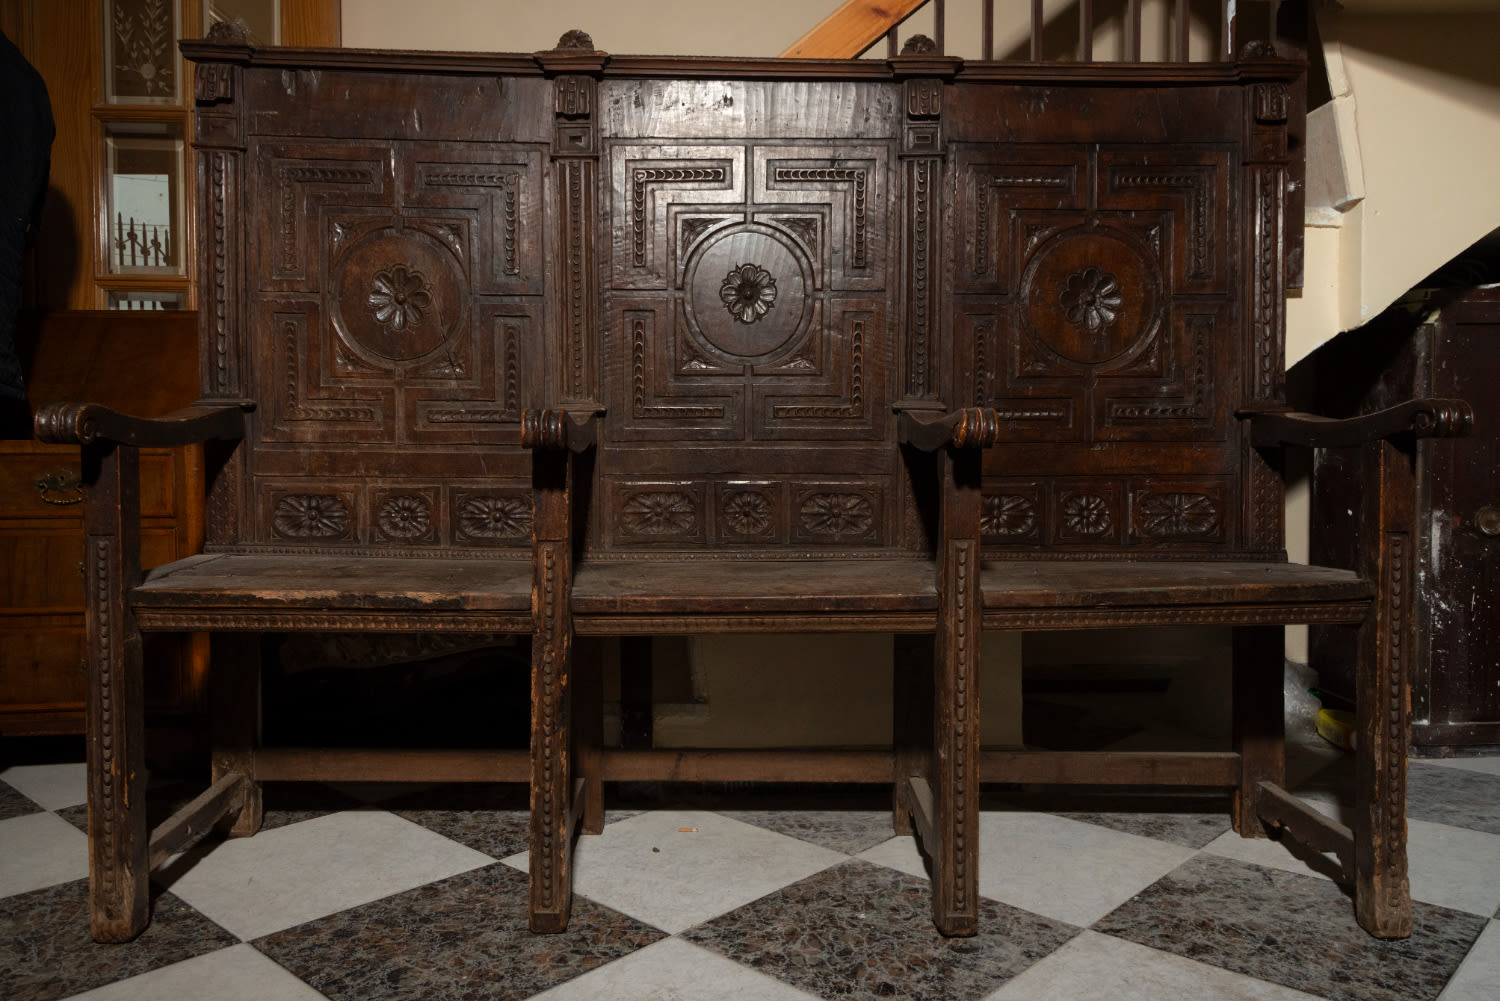 Late Gothic early 16th century Escorial Spanish style choir bench, in oak